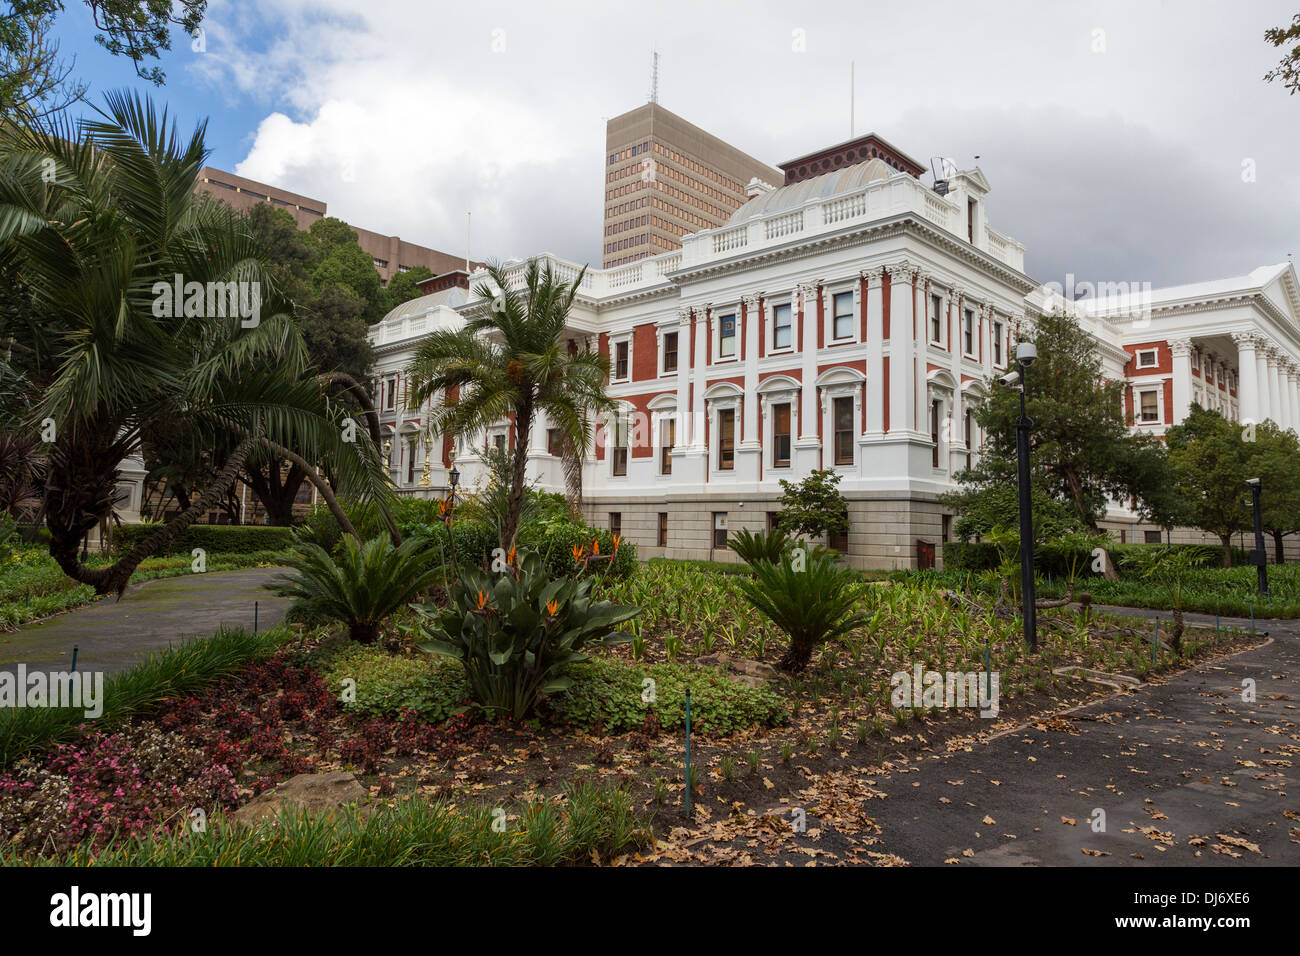 South Africa, Cape Town. Houses of Parliament. Stock Photo